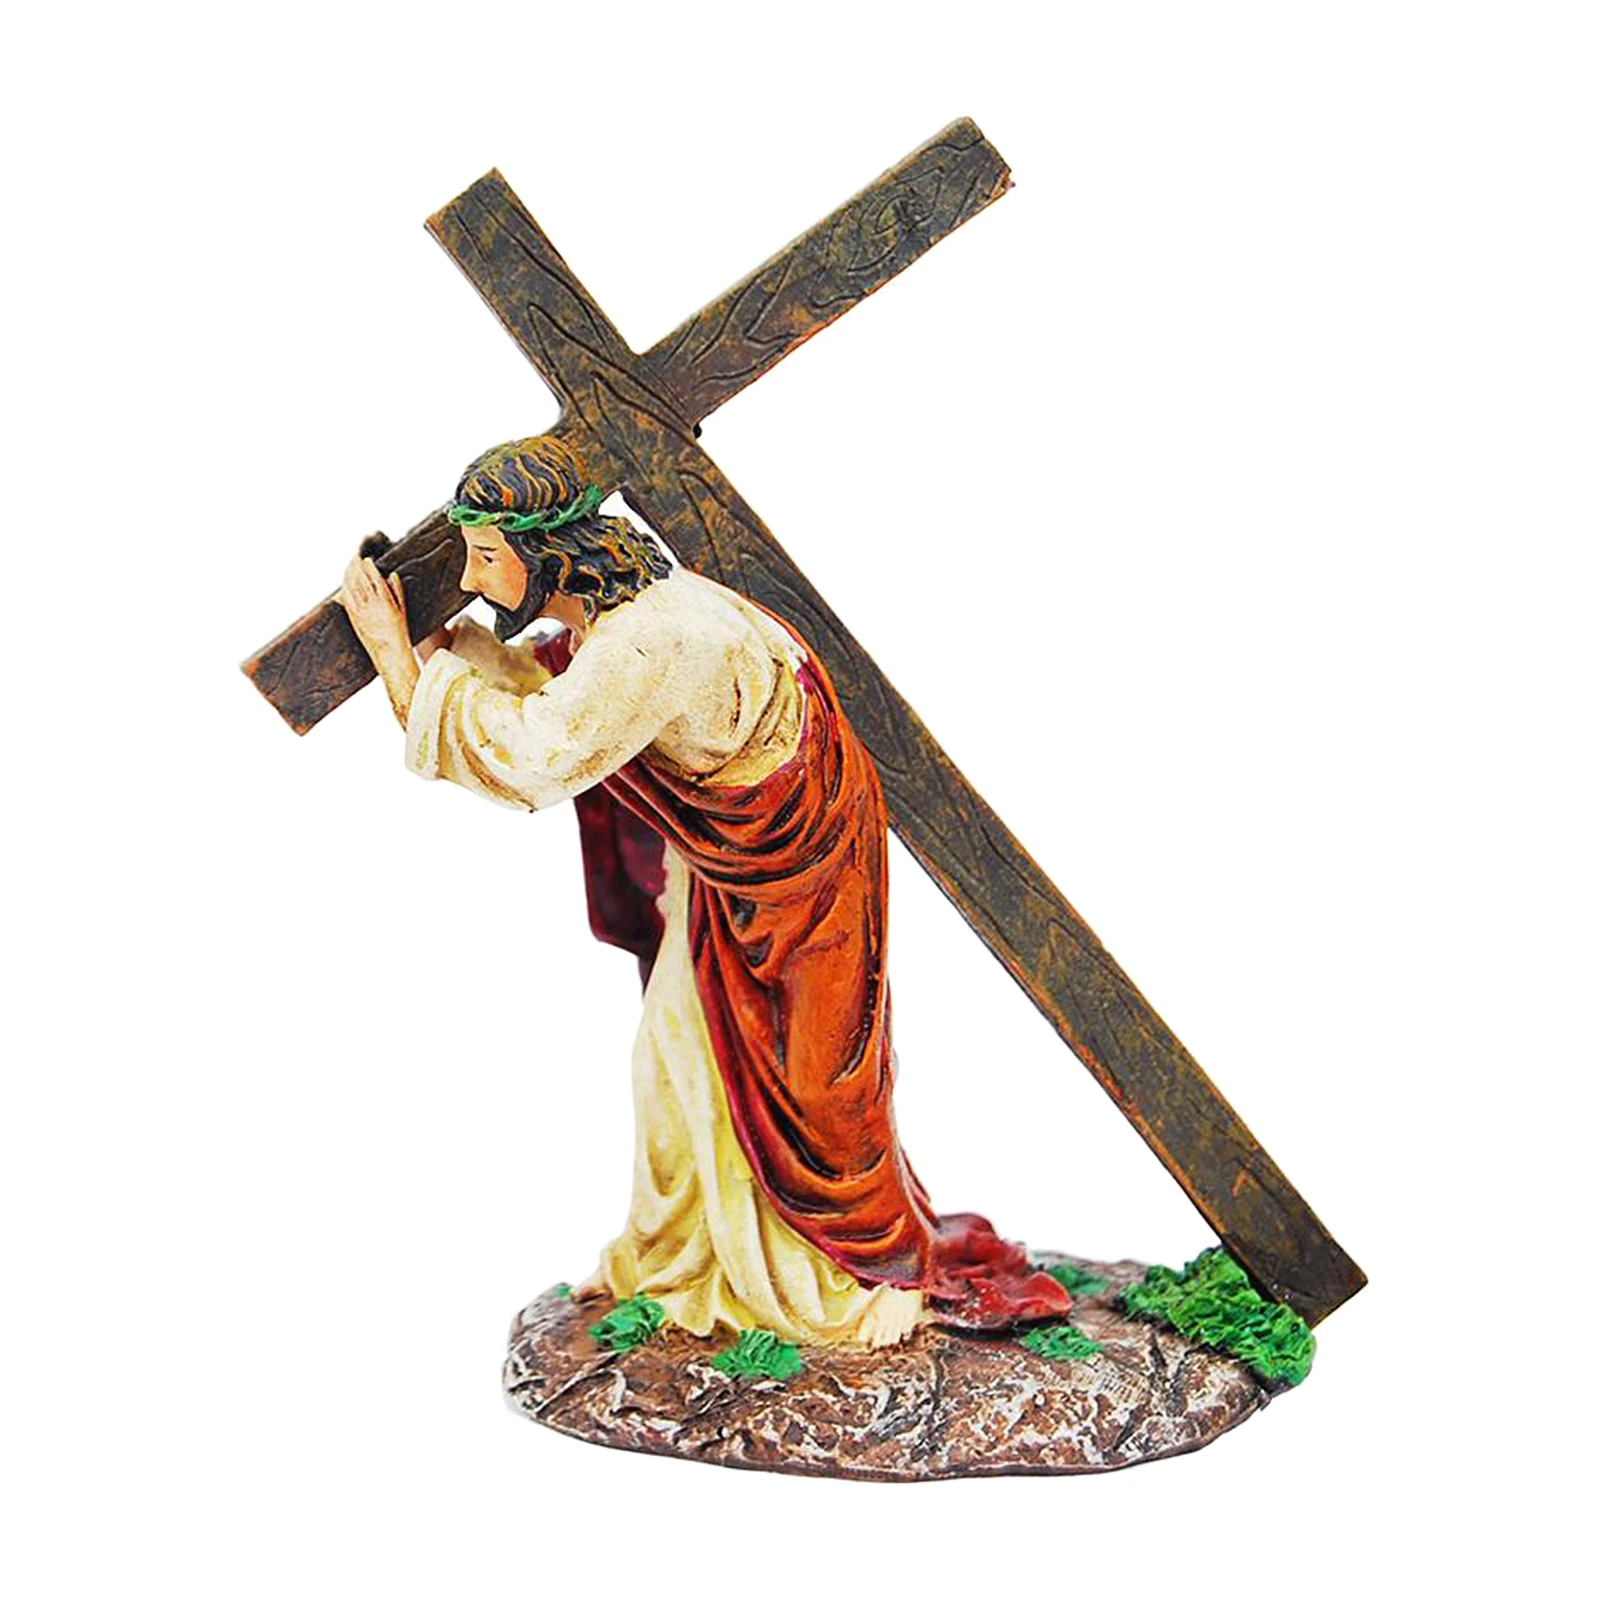 Jesus on The Way to Calvary 5 Inch Tall Jesus Figure Made of Resin and Hand Painted Jesus Statue Figurine for Car Decor